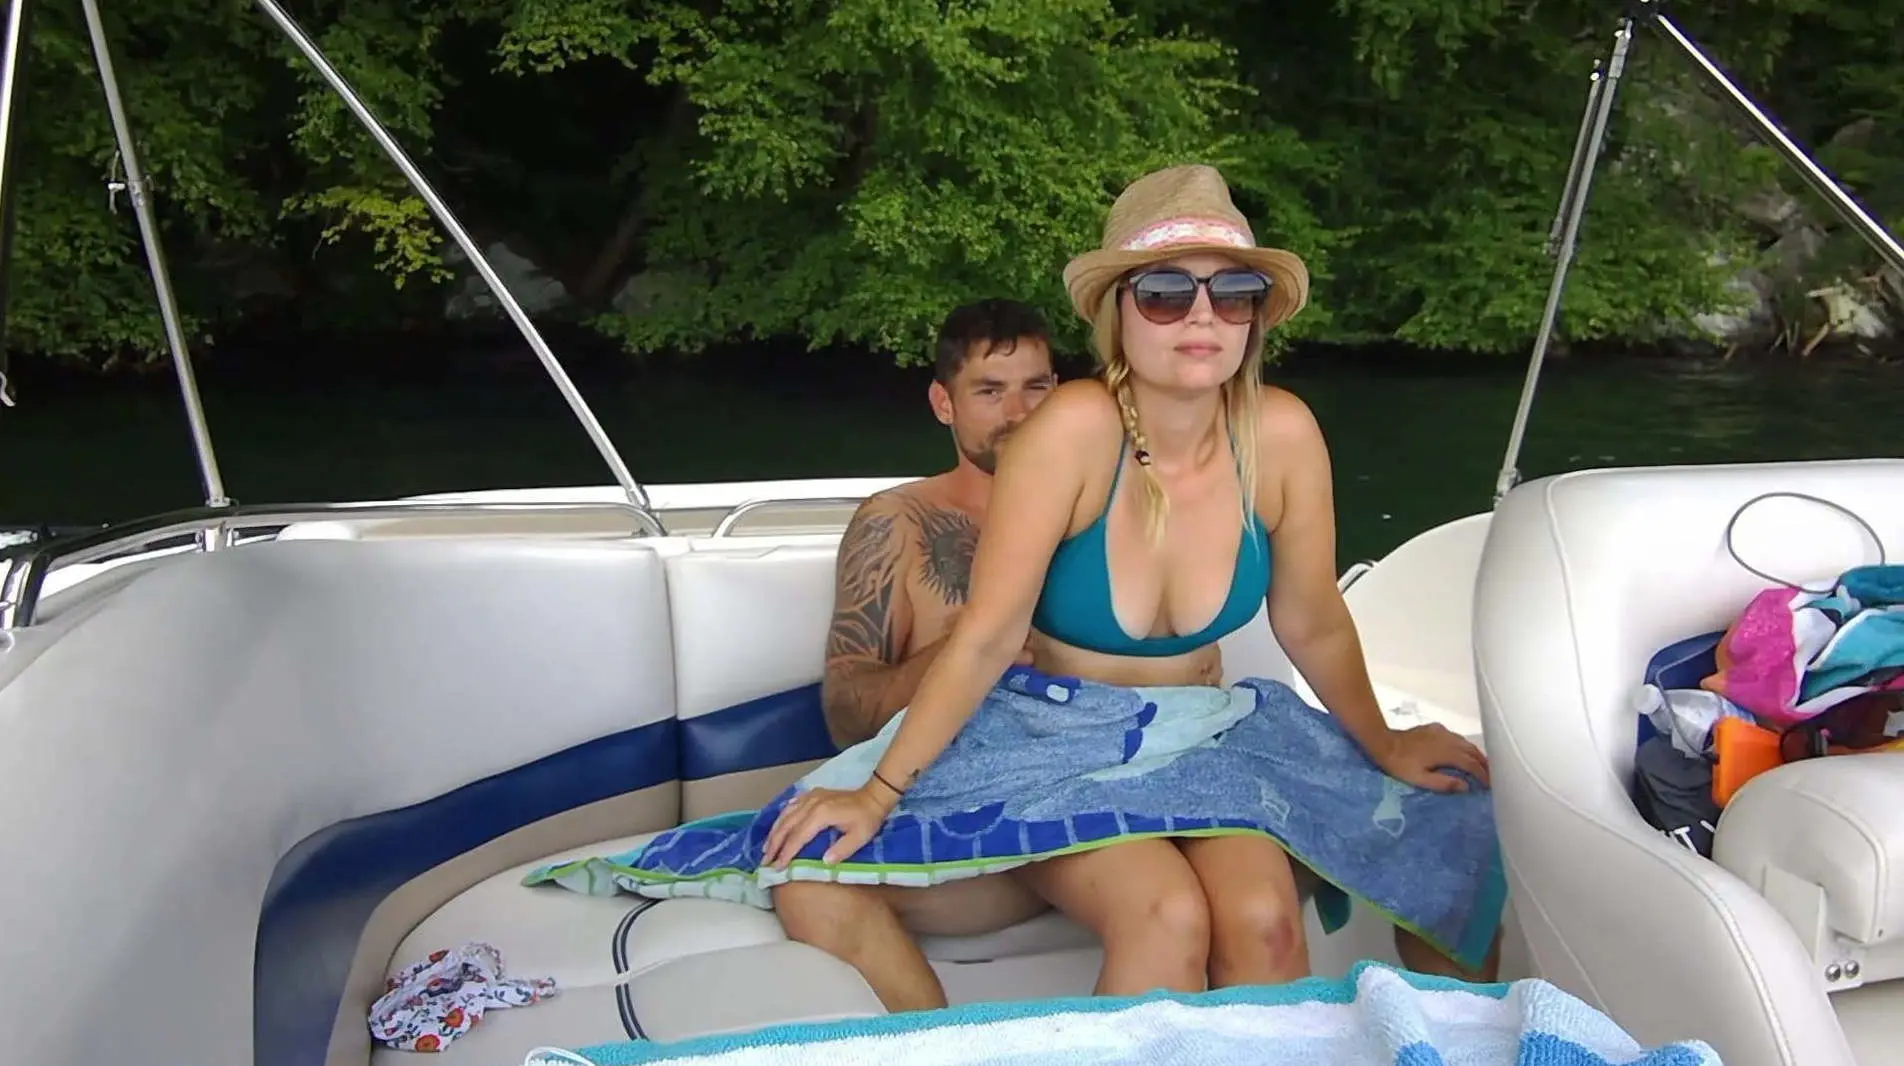 Some fun with public sex on our boat image